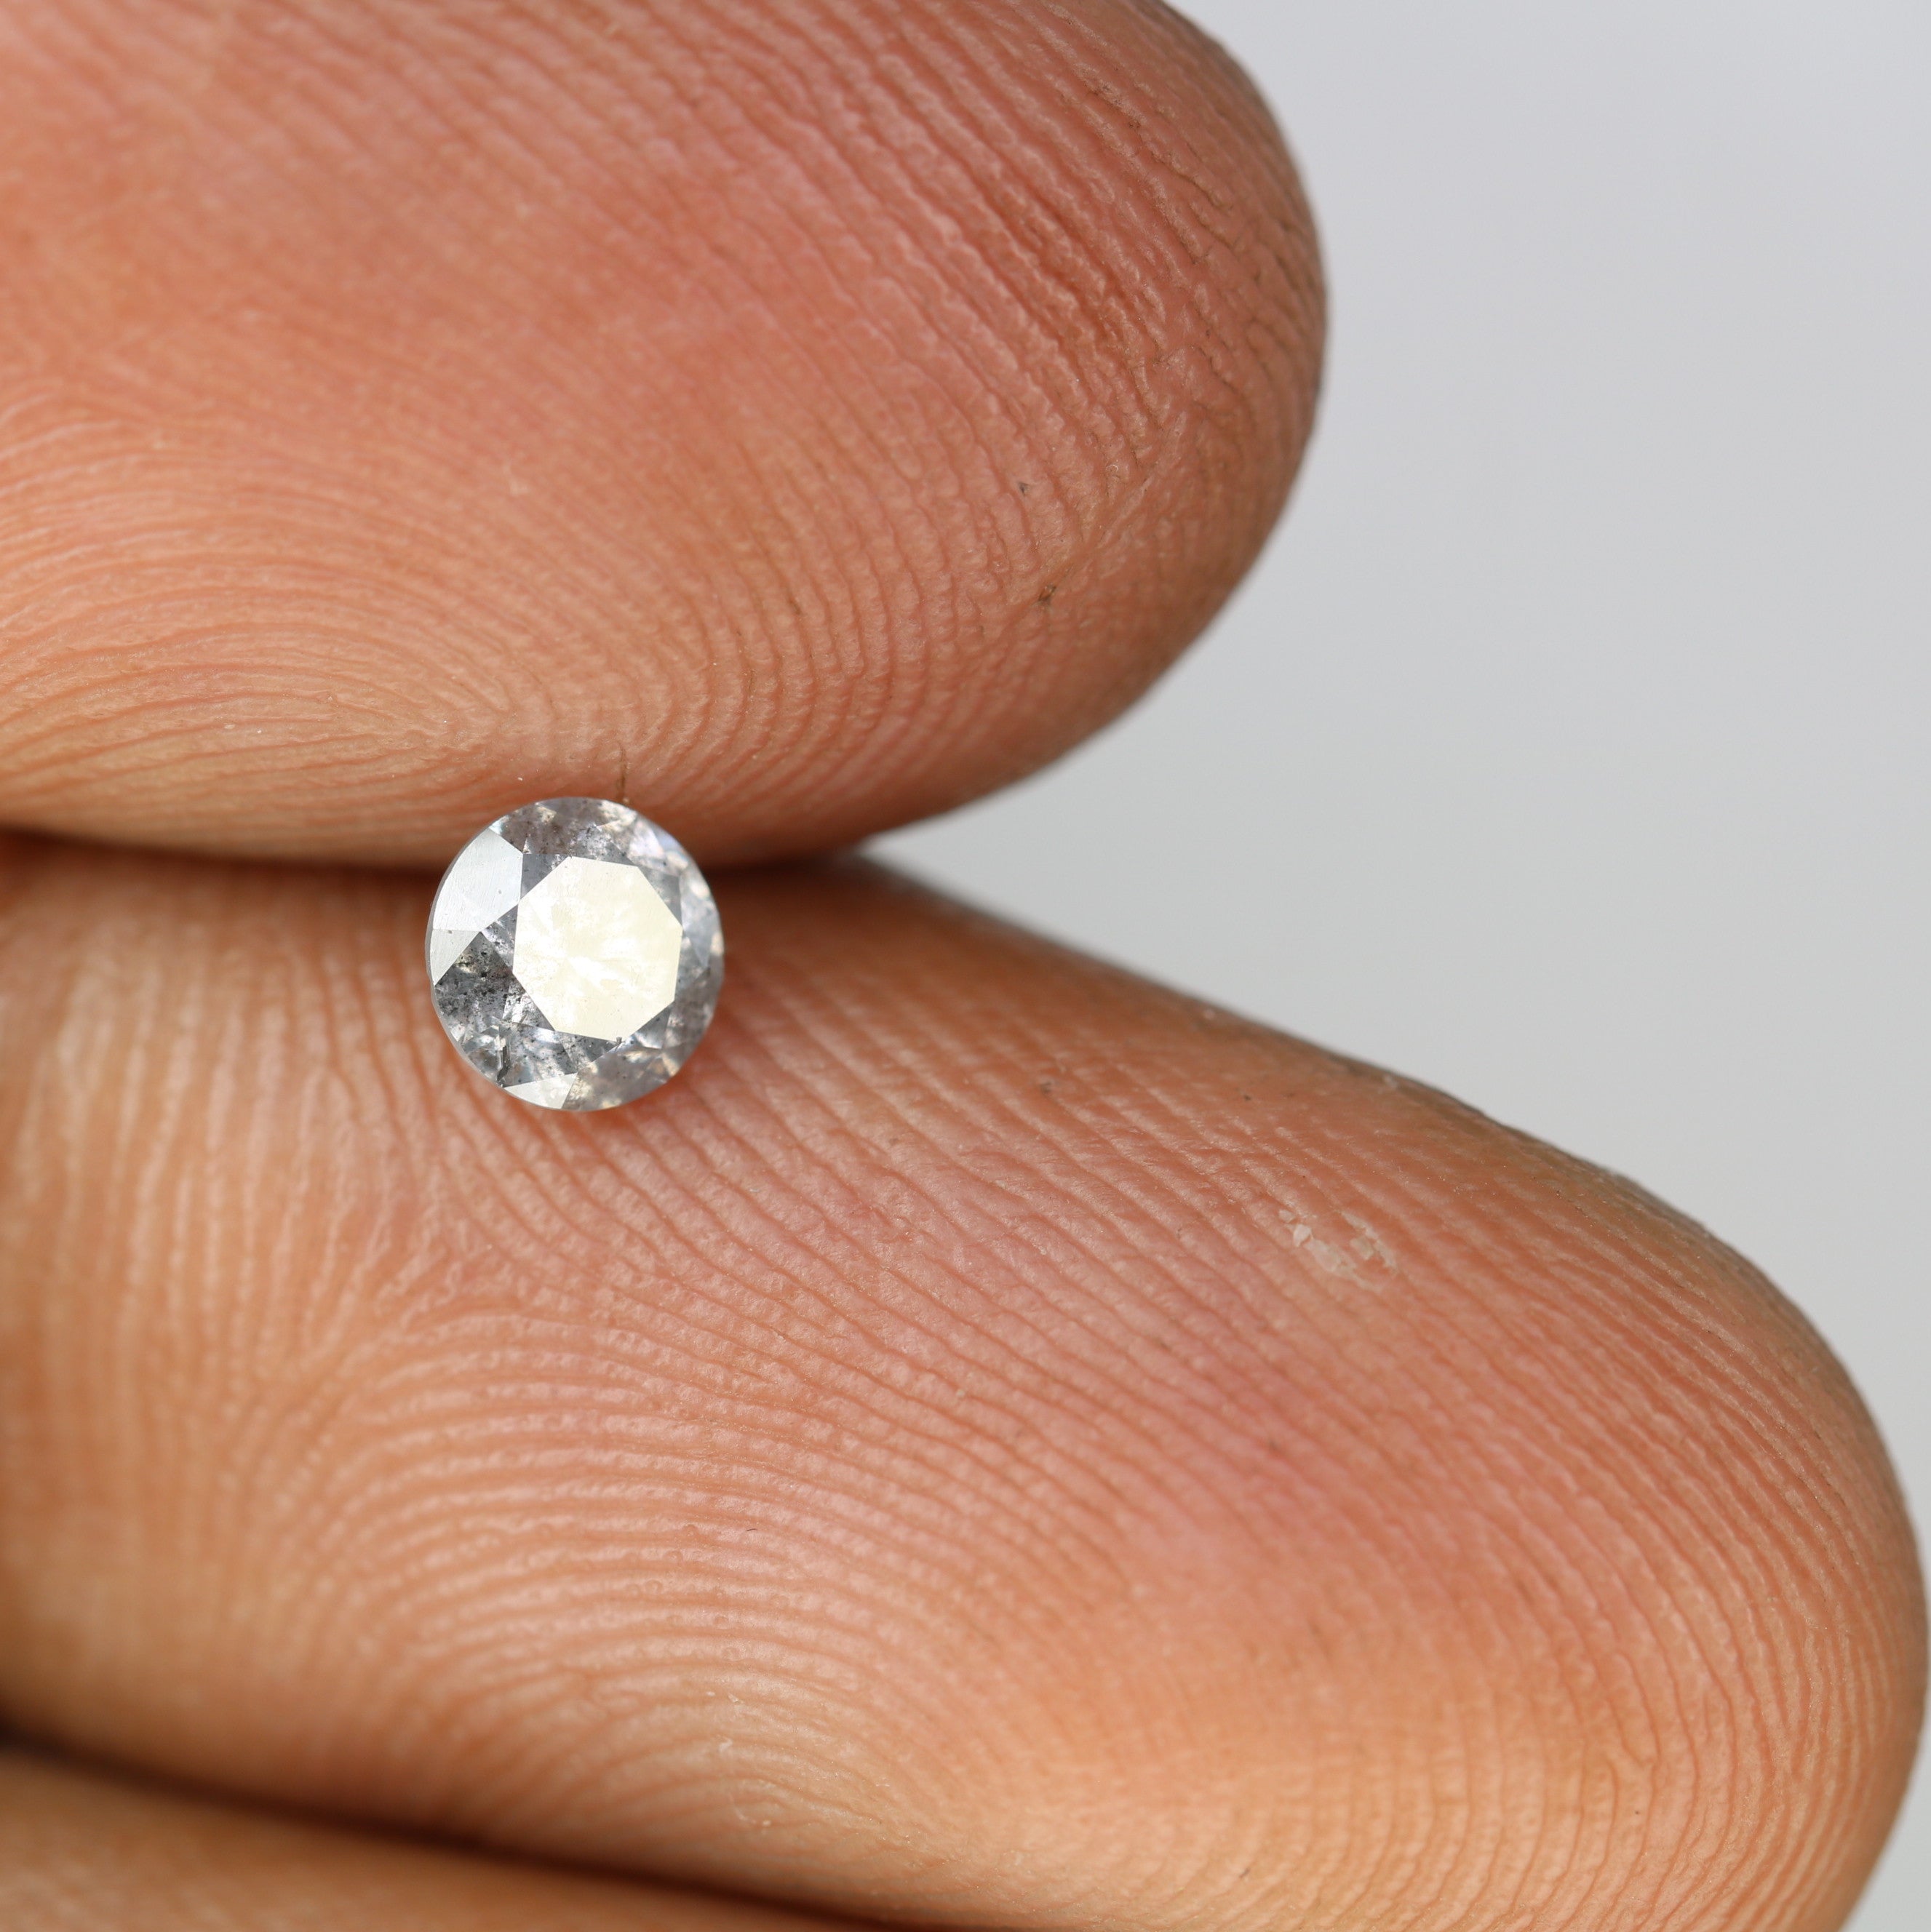 0.40 CT  Salt And Pepper Round Brilliant Cut Loose Diamond For Engagement Ring